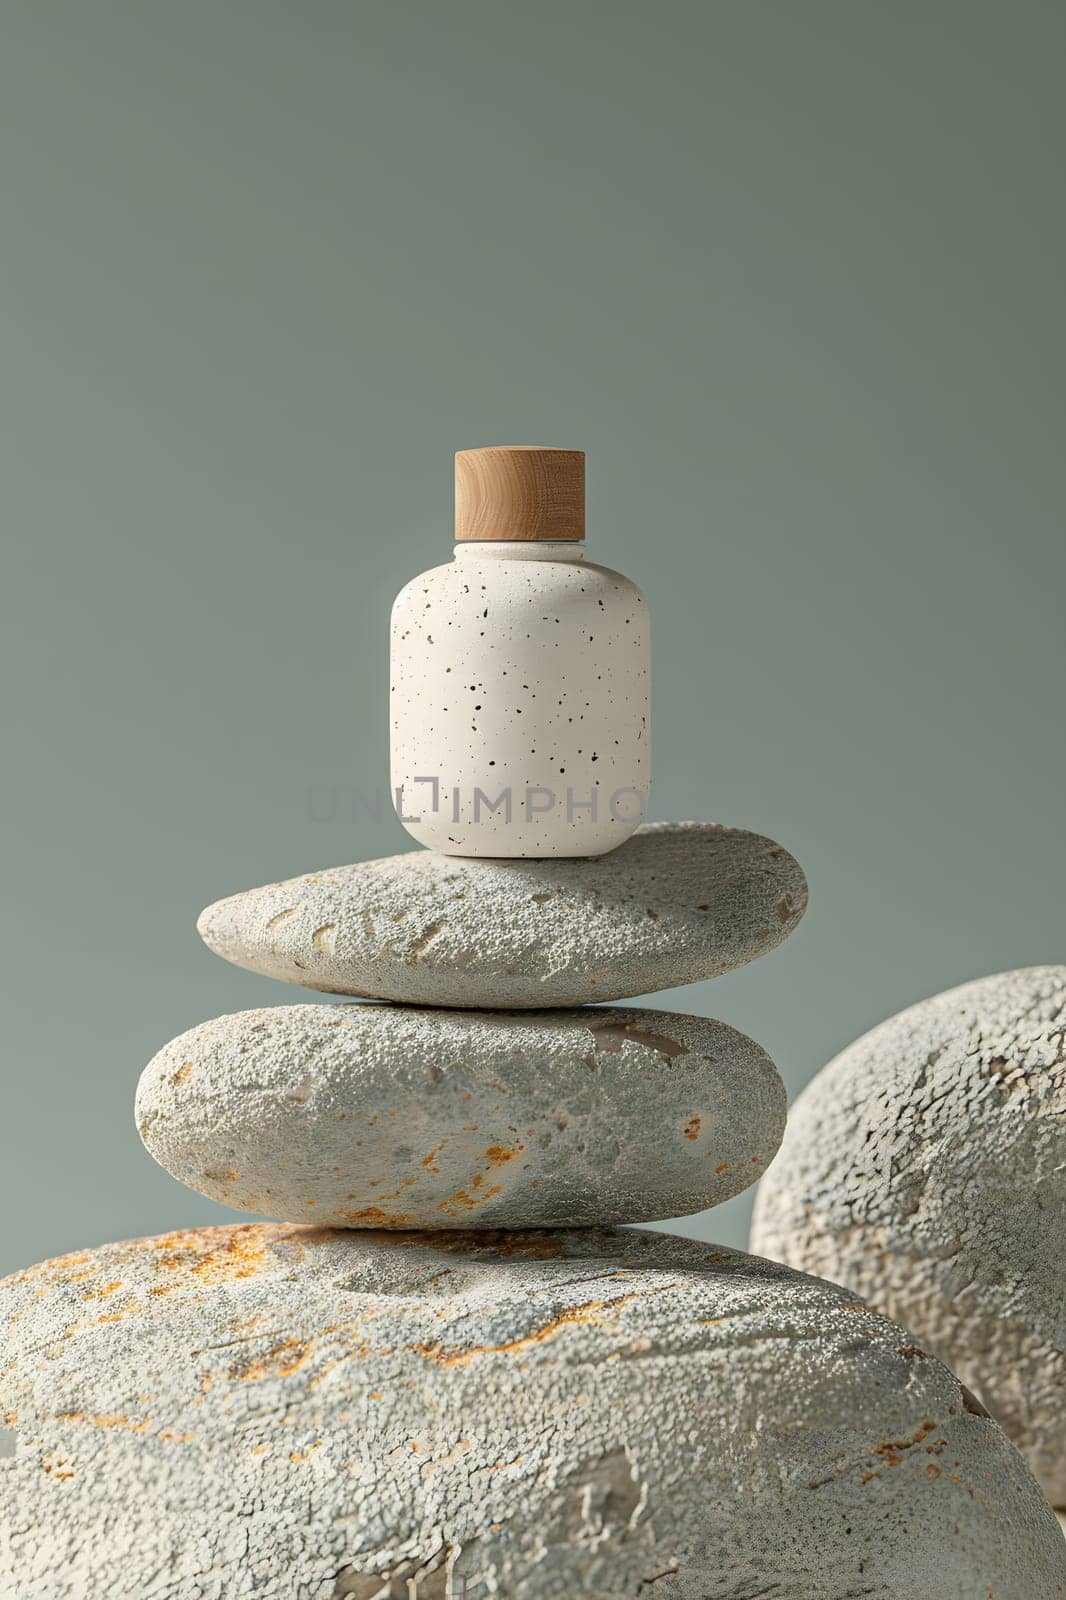 A bottle of lotion, a fluid containing various ingredients, is perched on a pile of rocks, showcasing a delicate balance between liquid and solid, nature and human creation